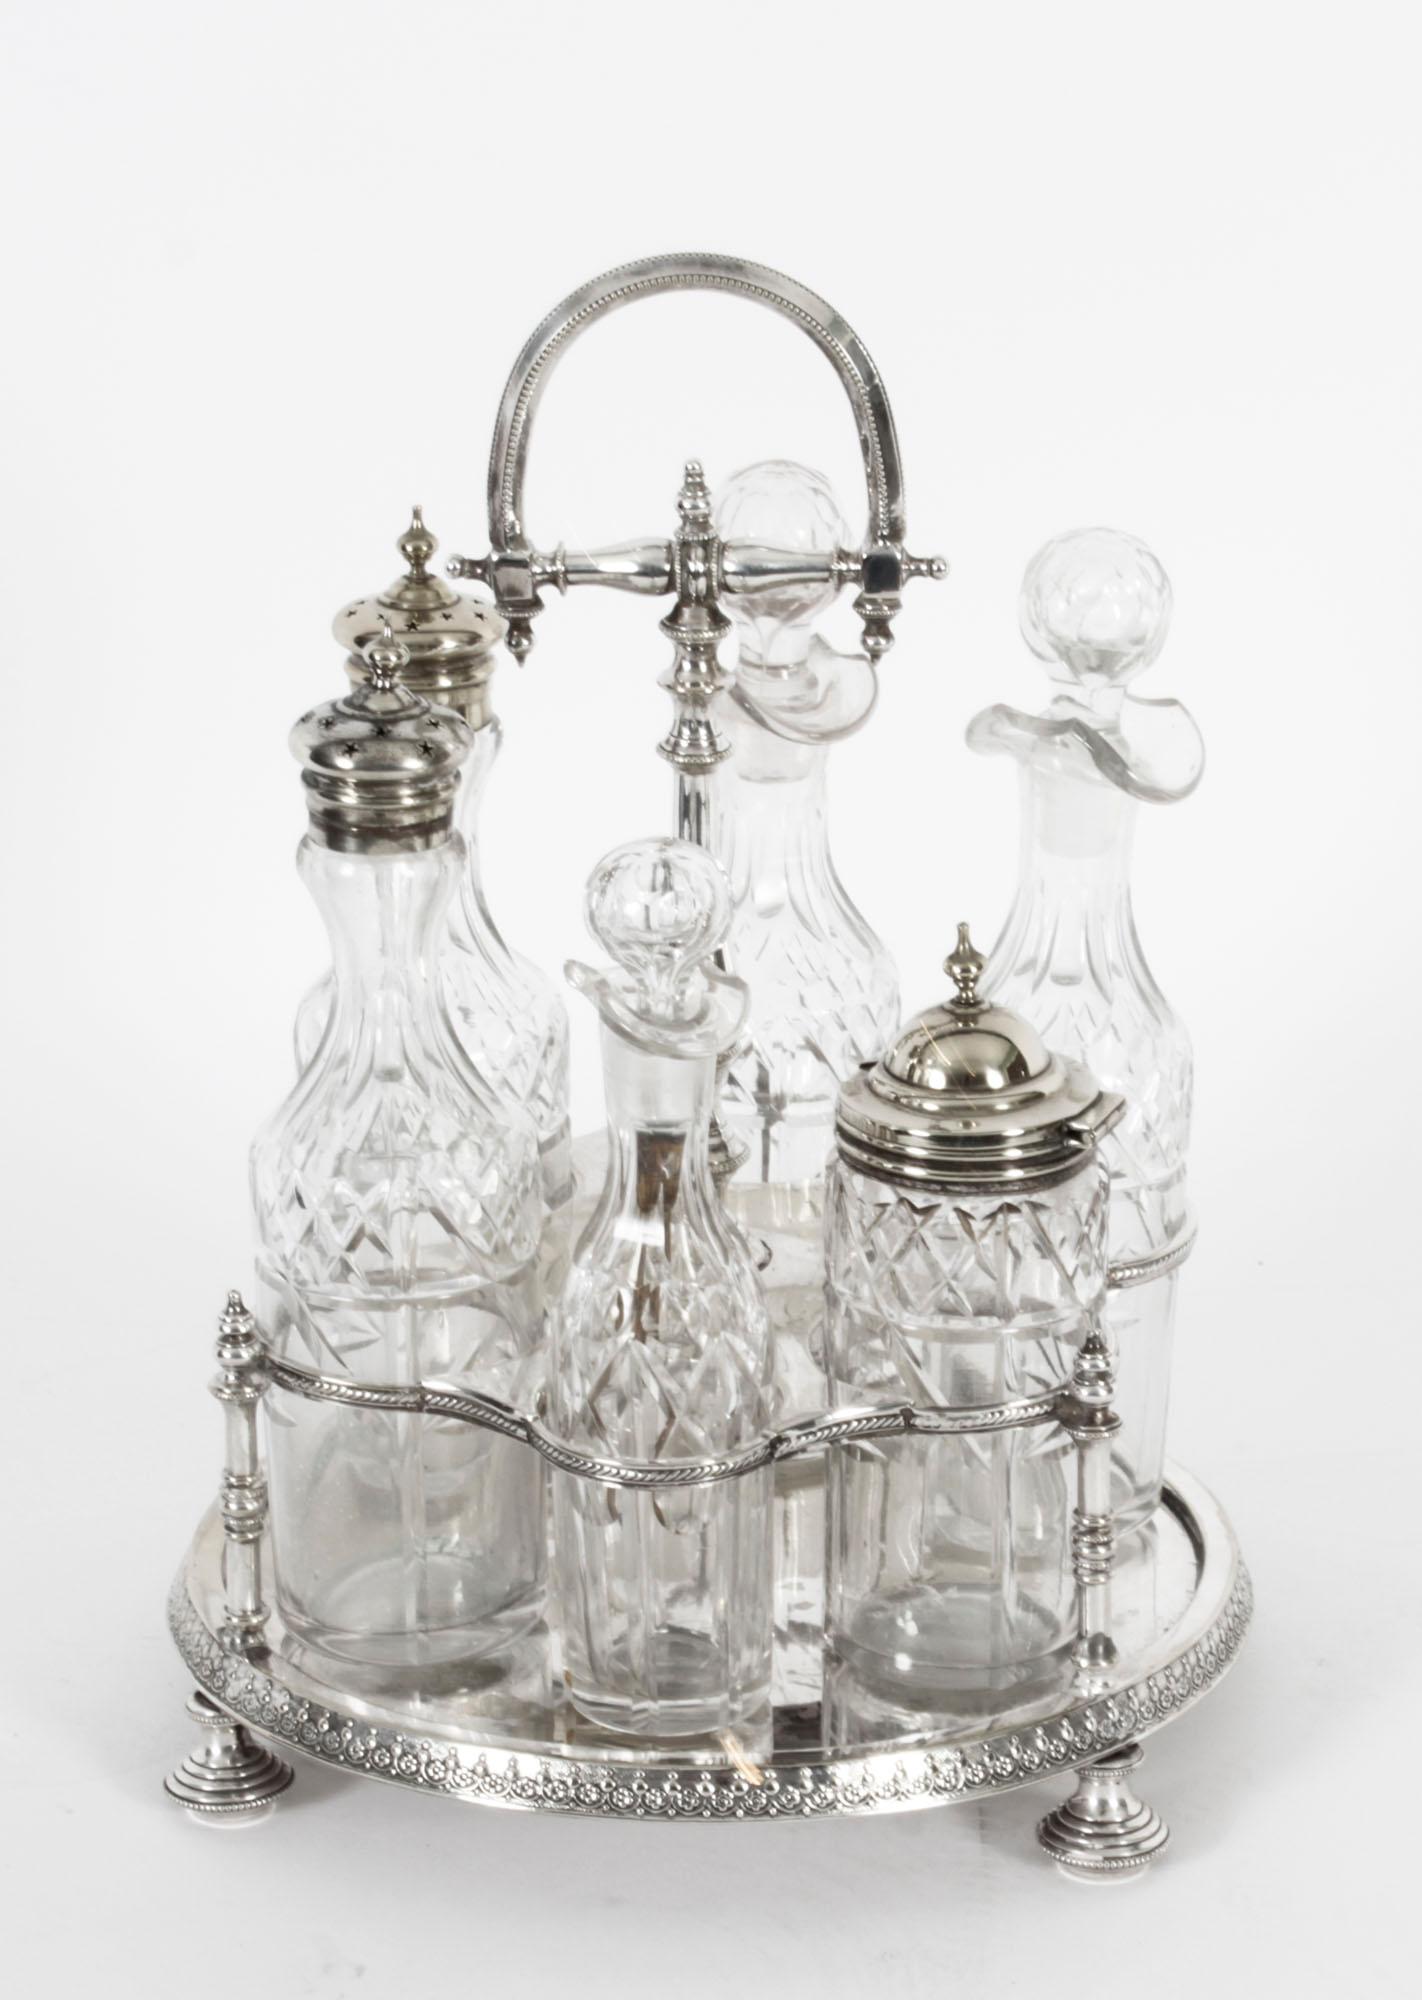 This is a gorgeous antique silver plated cruet set bearing, circa 1880 in date.
 
The set comprises a beautifully decorative silver plated cruet stand holding six exquisite cut glass condiment bottles traditionally for chilli, soy, cayenne,